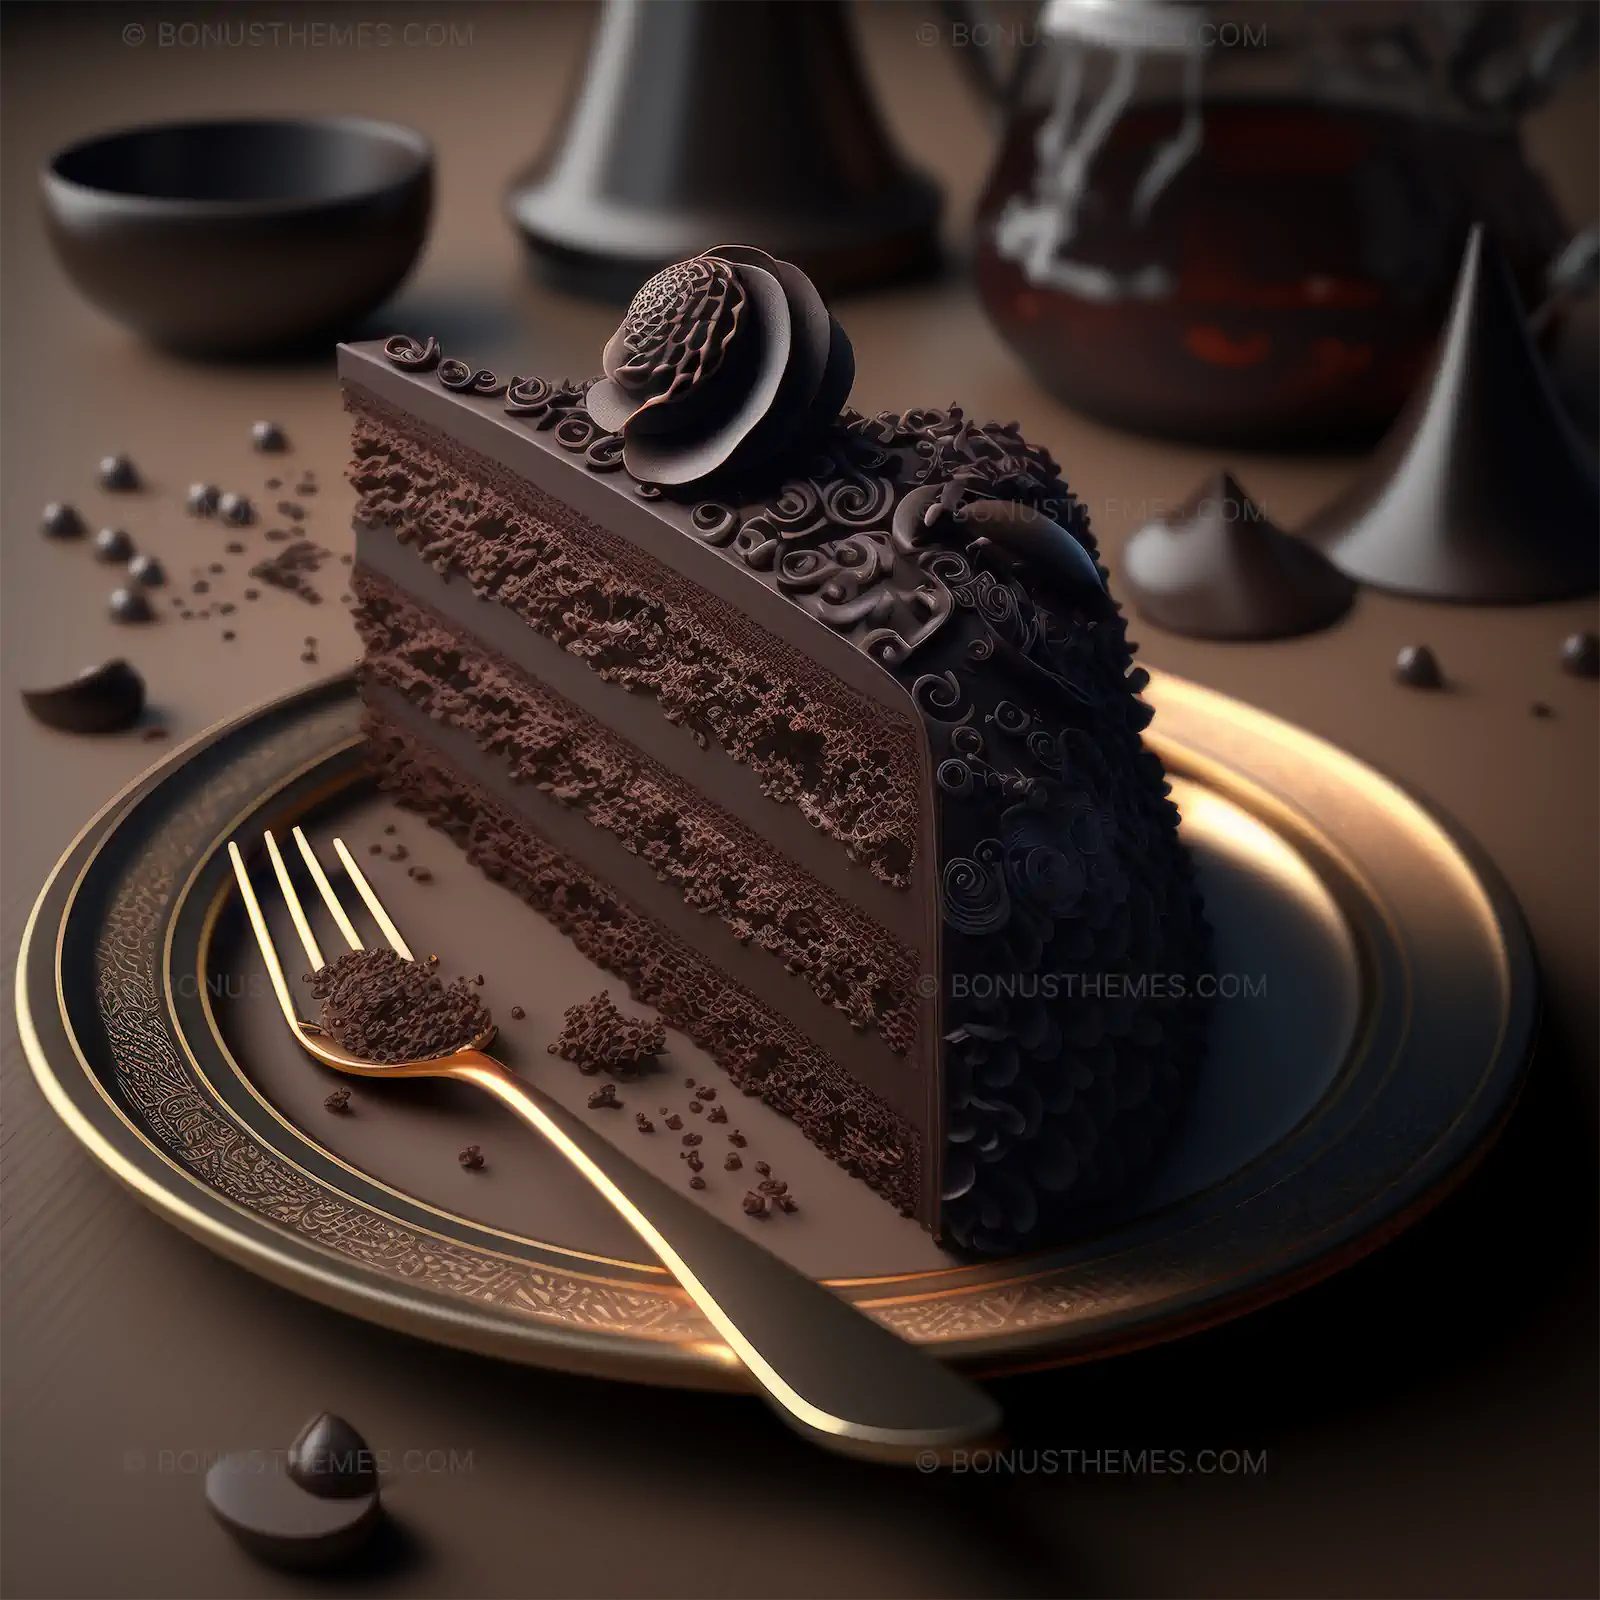 Chocolate cake on a golden plate